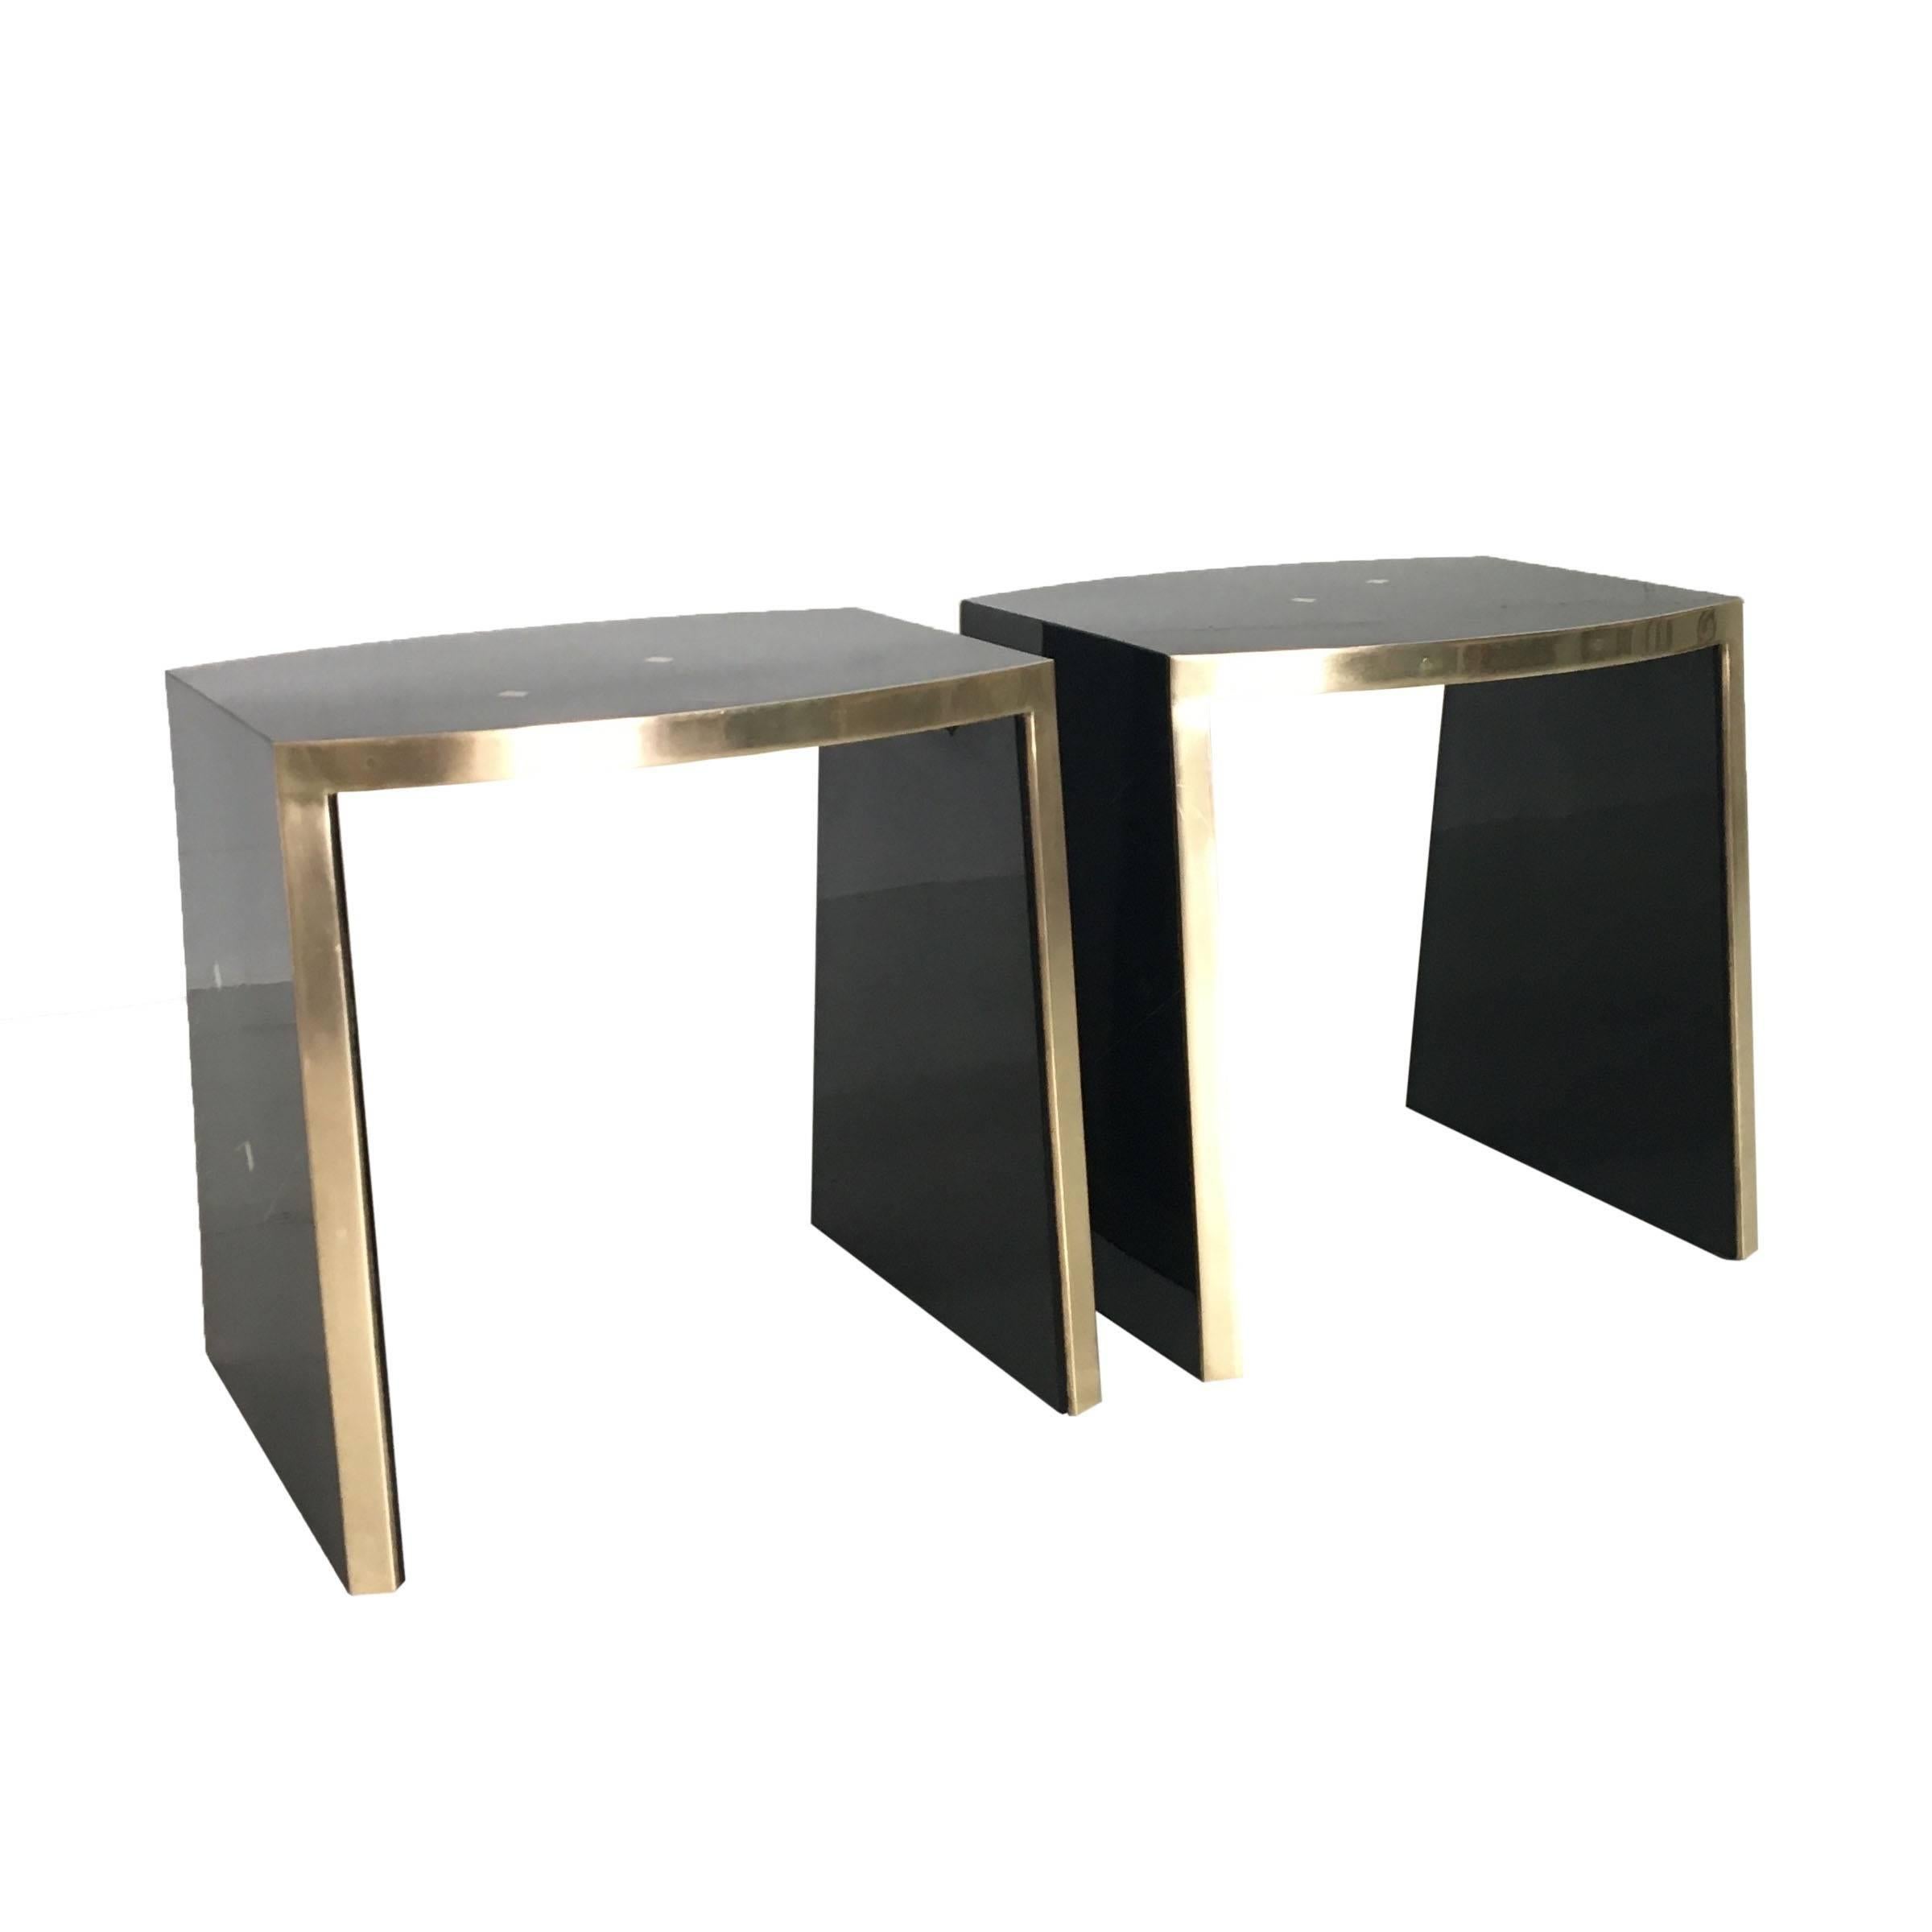 A pair of amazing Ron Seff side tables in black lacquer, mother-of-pearl and 24-karat gilt framing. Some age appropriate wear on the lacquer finish.

Ron Seff was a designer most notable for his collections in the 1980s, epitomizing glamour with the